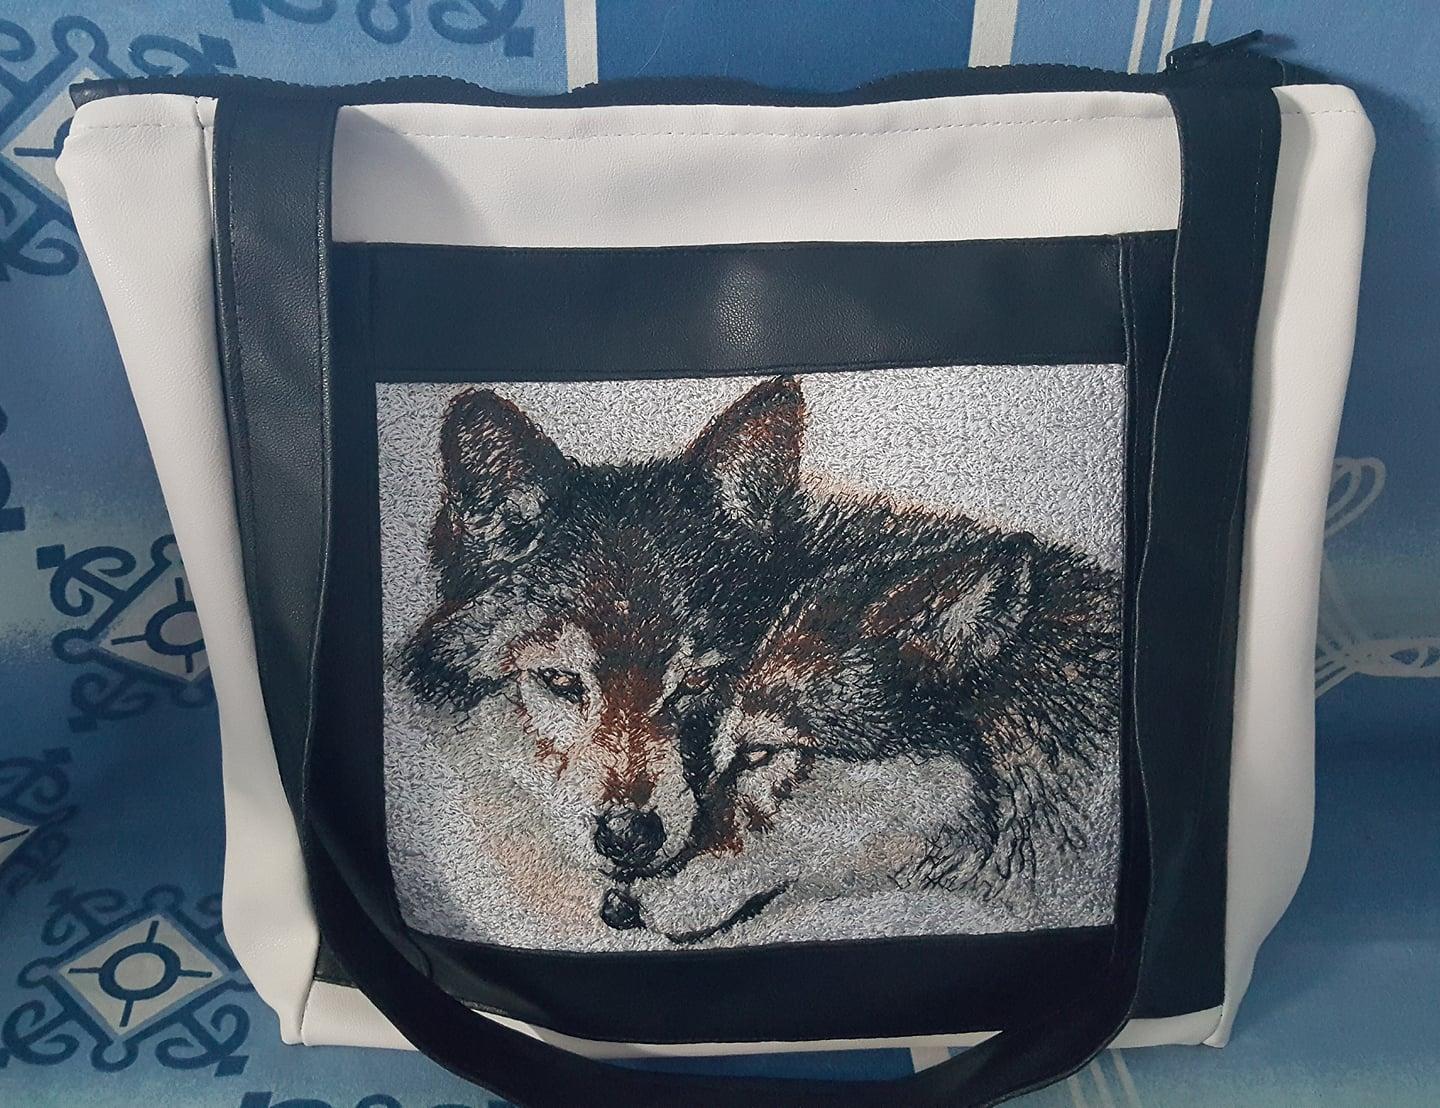 Express Wild Spirit with Stunning Embroidered Bag Featuring Wolf Pair